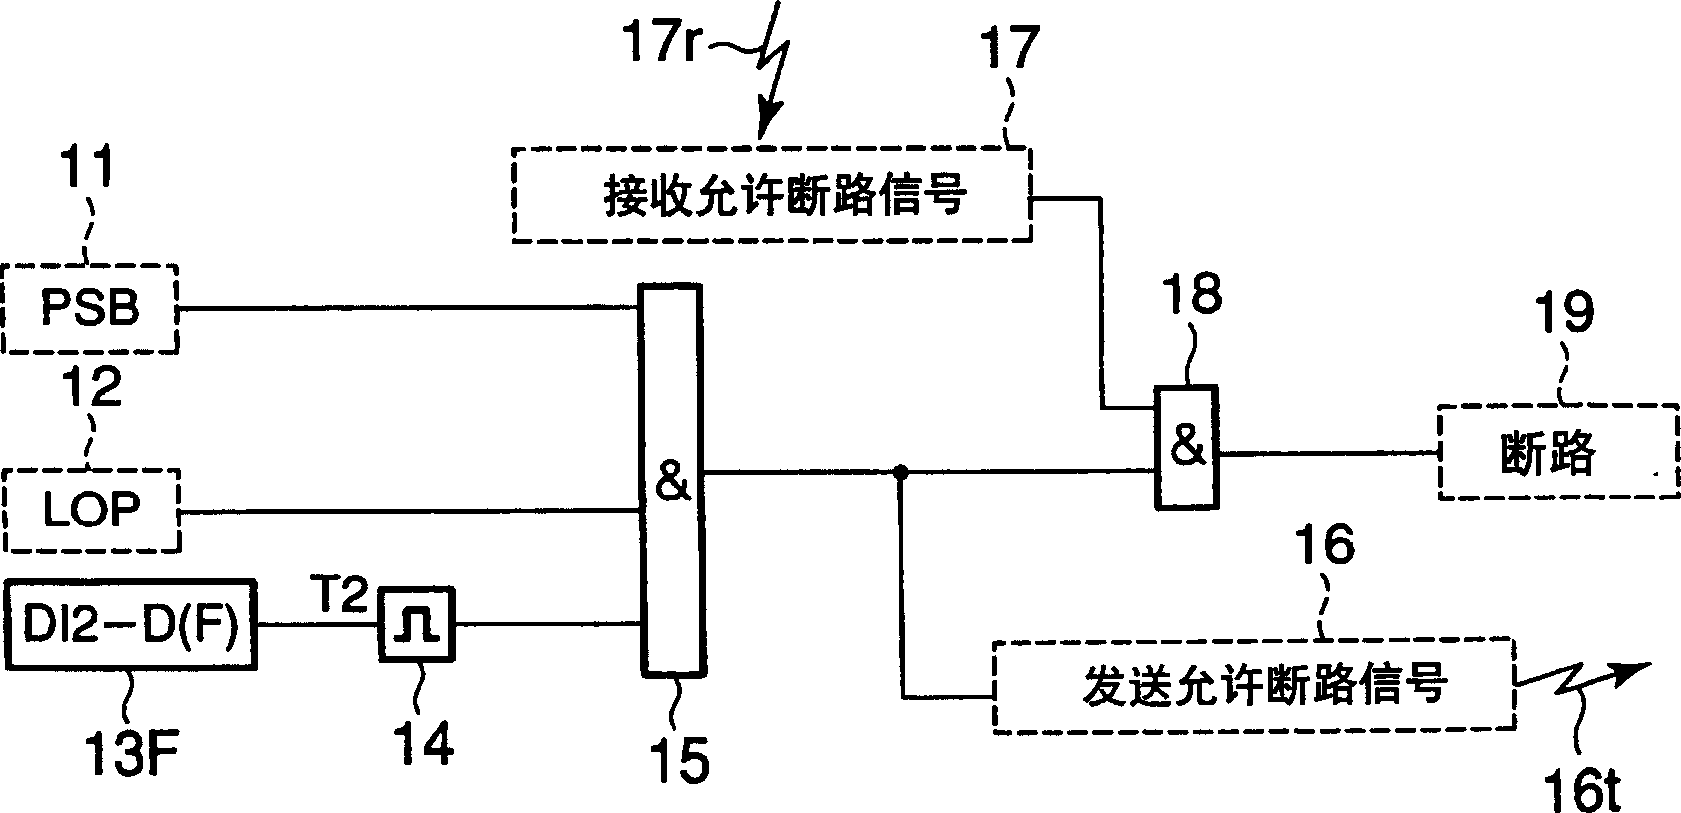 Protective relay device